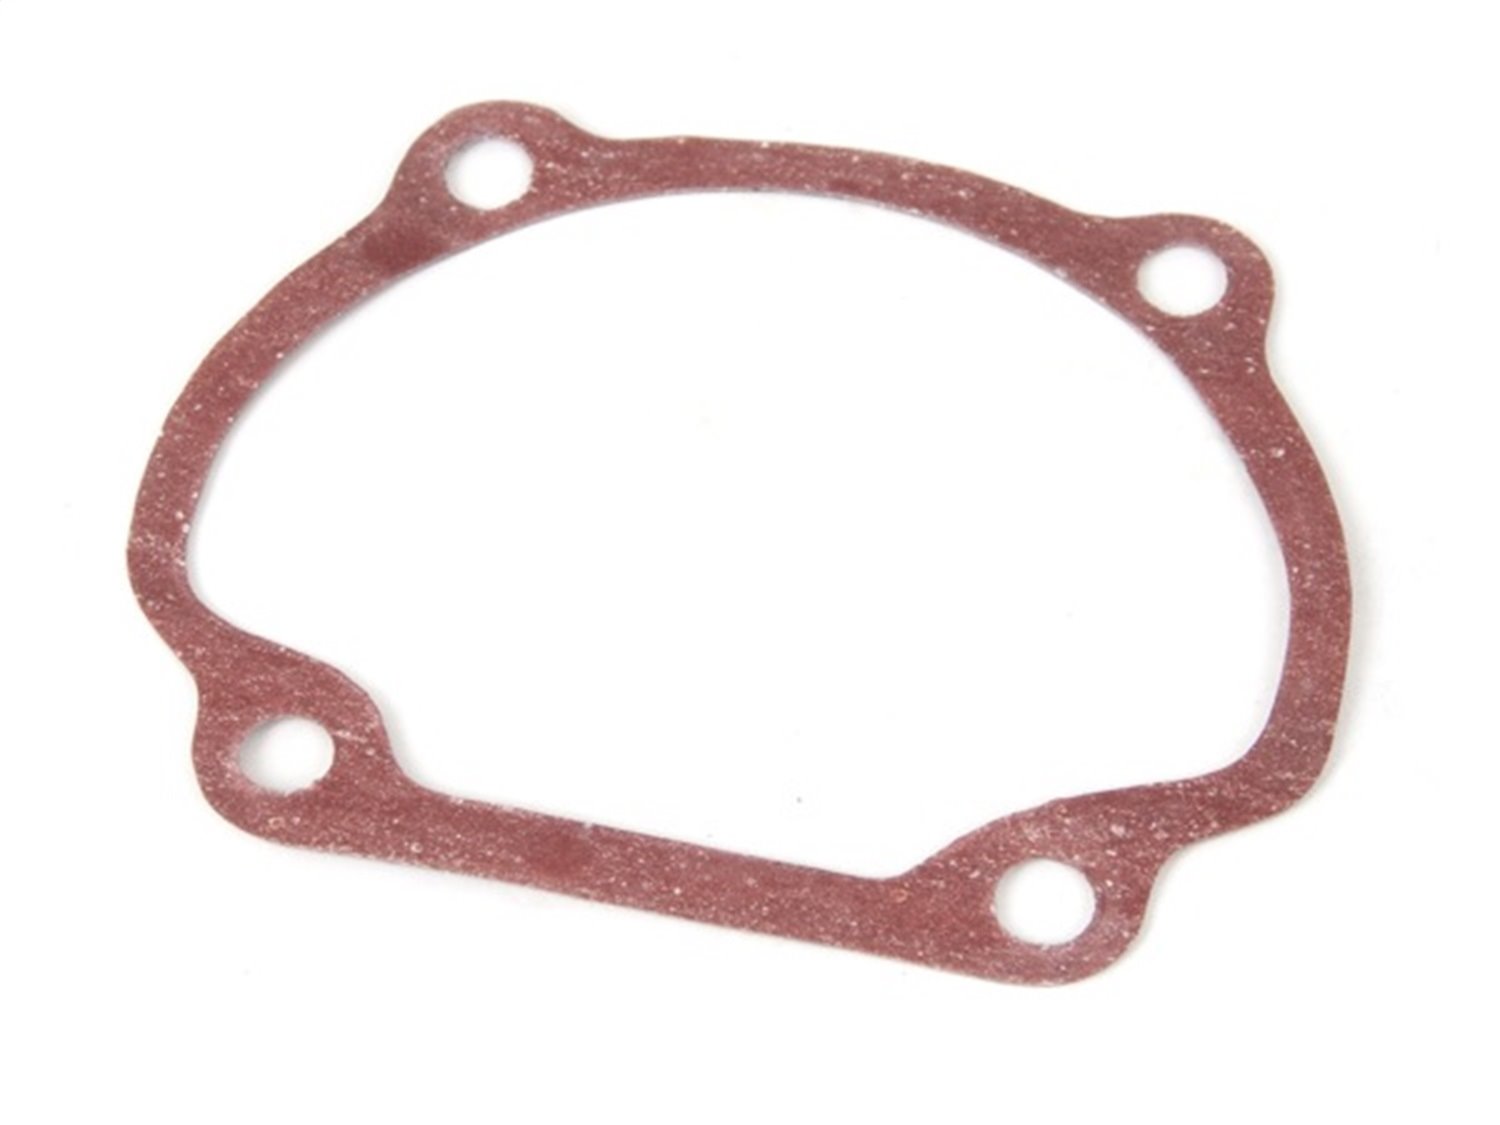 This steering box side cover gasket fits 41-45 Ford GPWs and Willy MBs 46-49 CJ-2A 49-53 CJ-3A 56-61